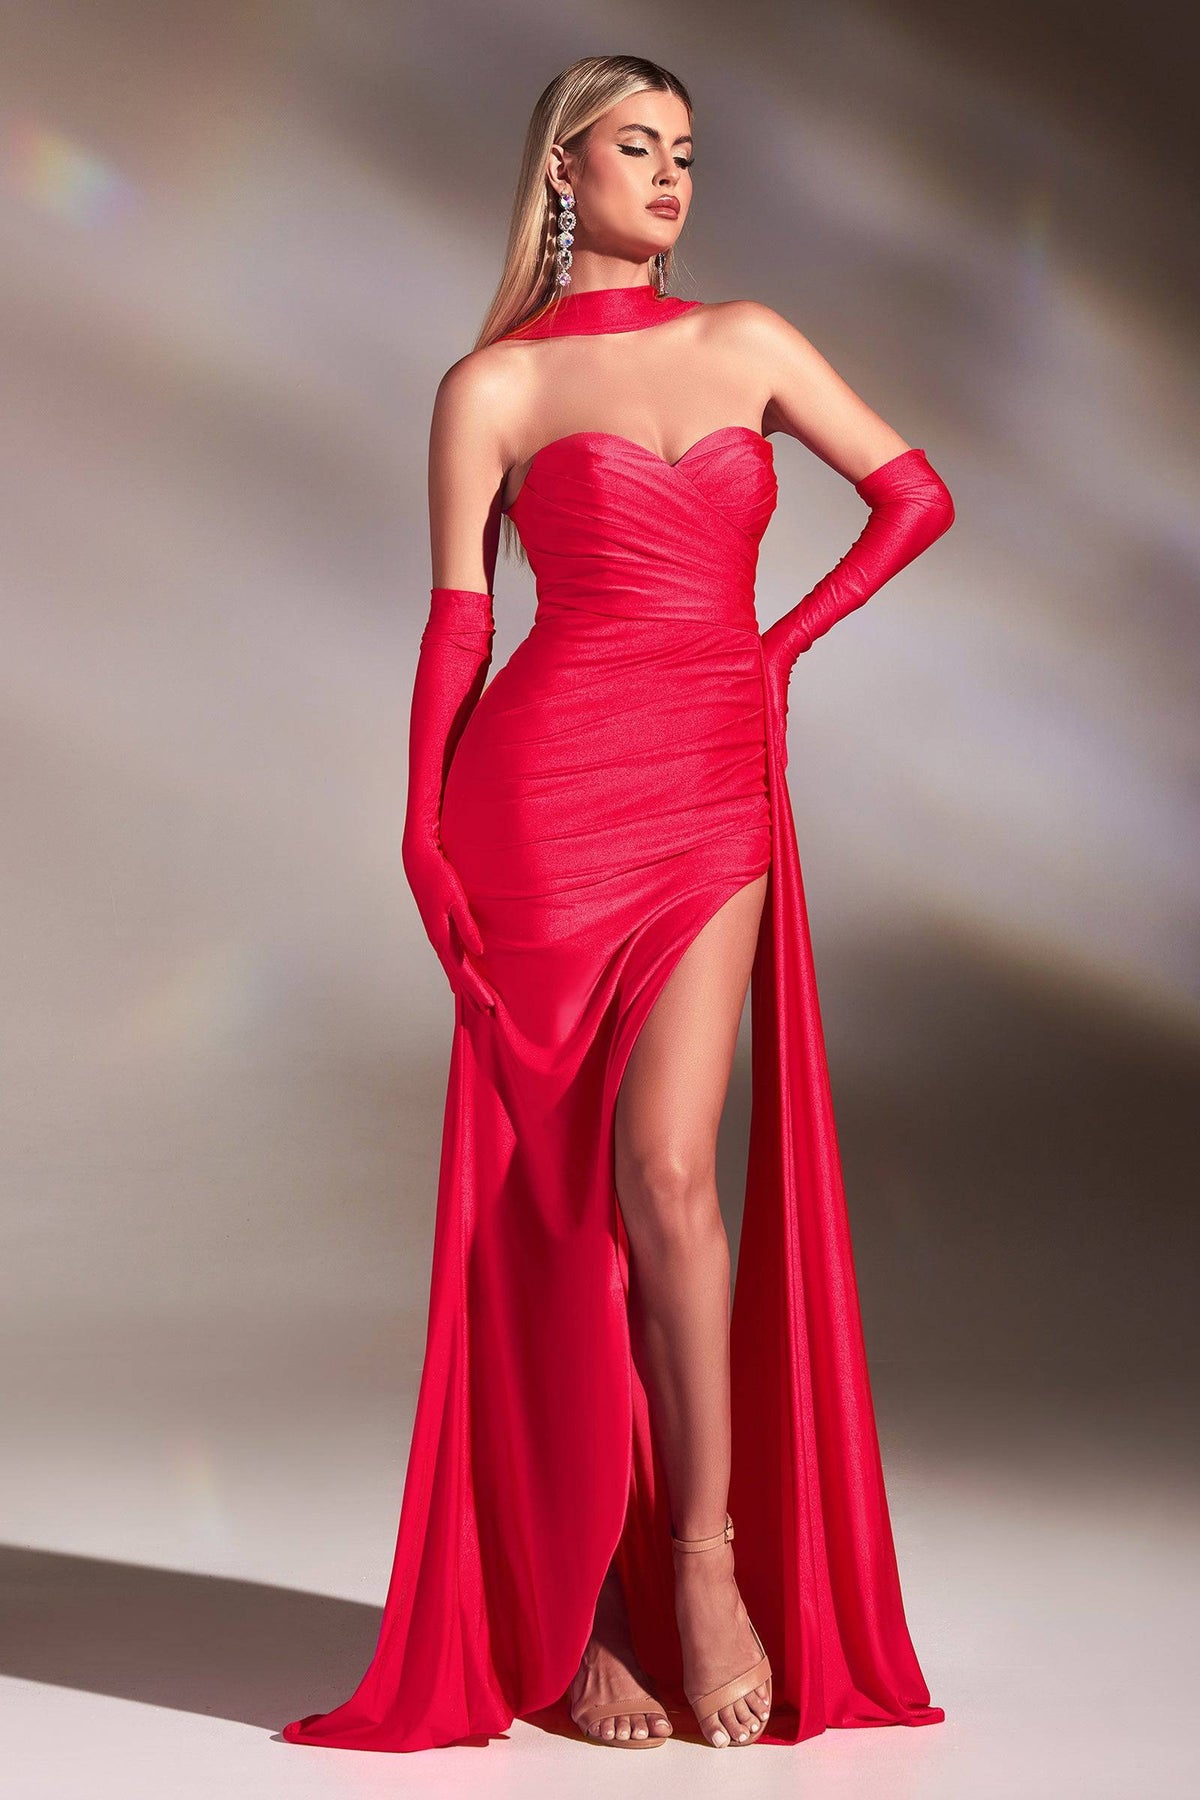 Cinderella Divine CD886 Strapless Ruched Dress In 10 Colors (Size 16-20) - NORMA REED